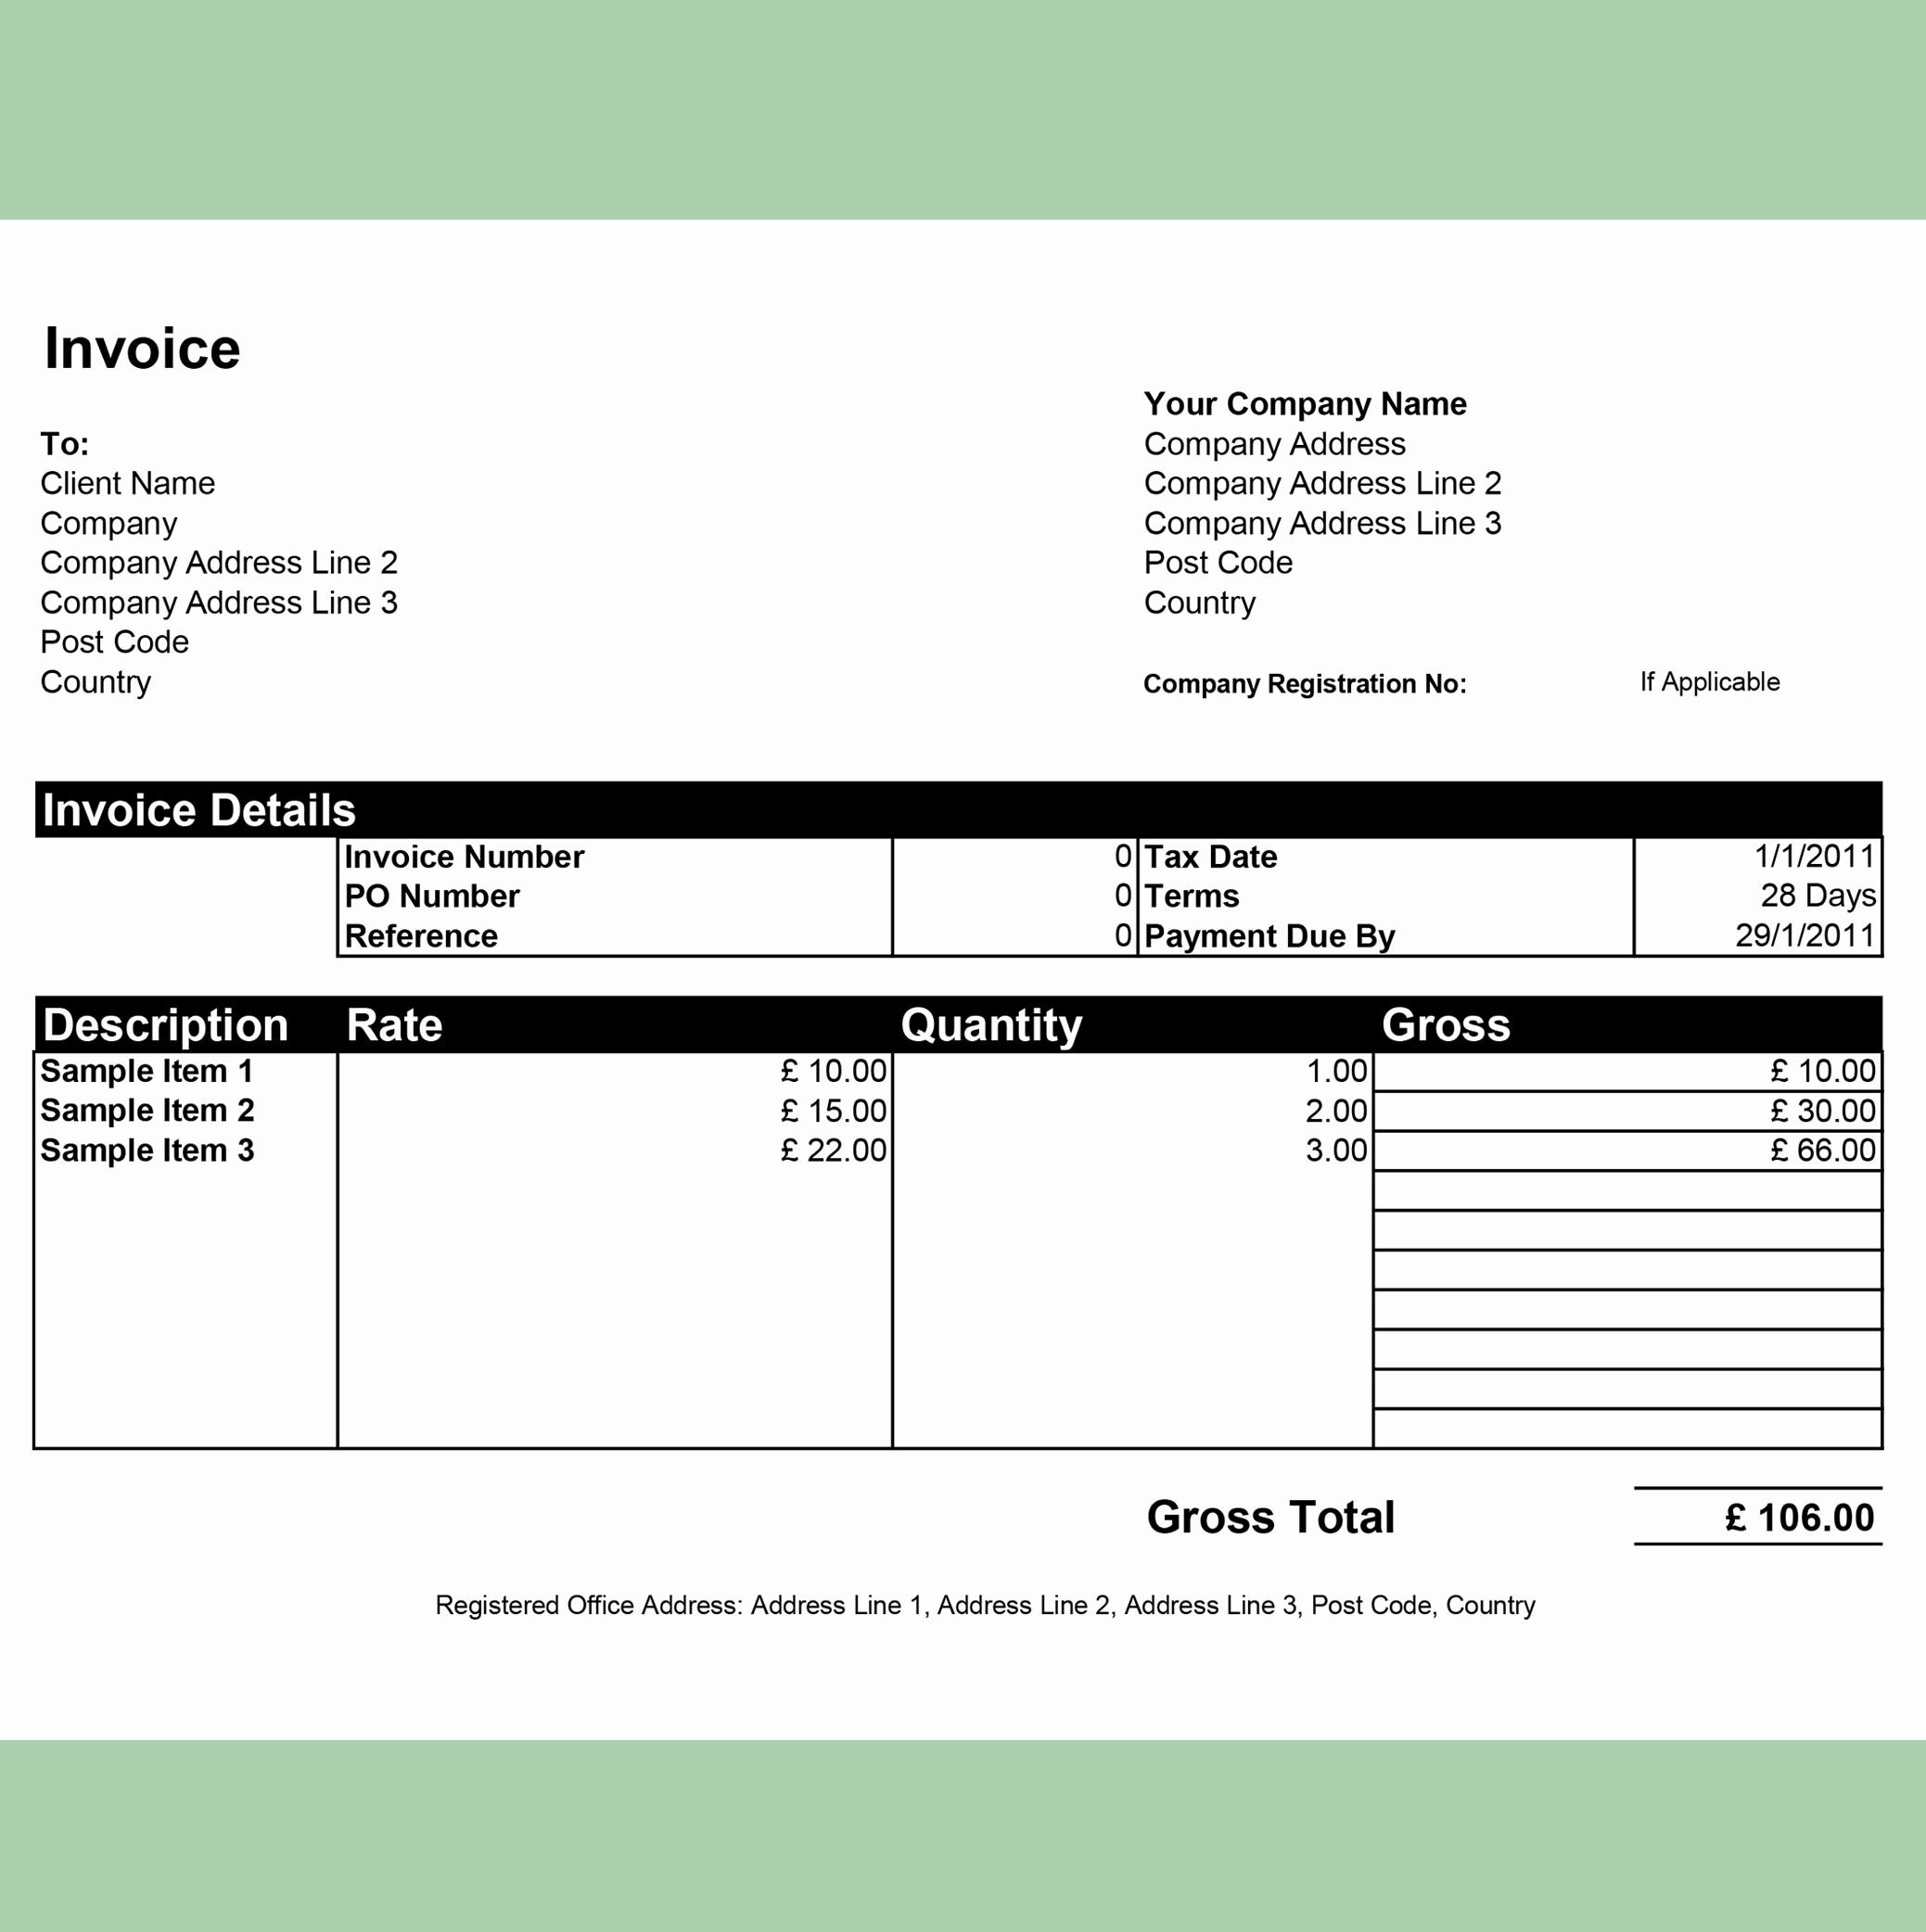 Free Invoice Template for Excel Lovely Free Invoice Templates by Invoiceberry the Grid System